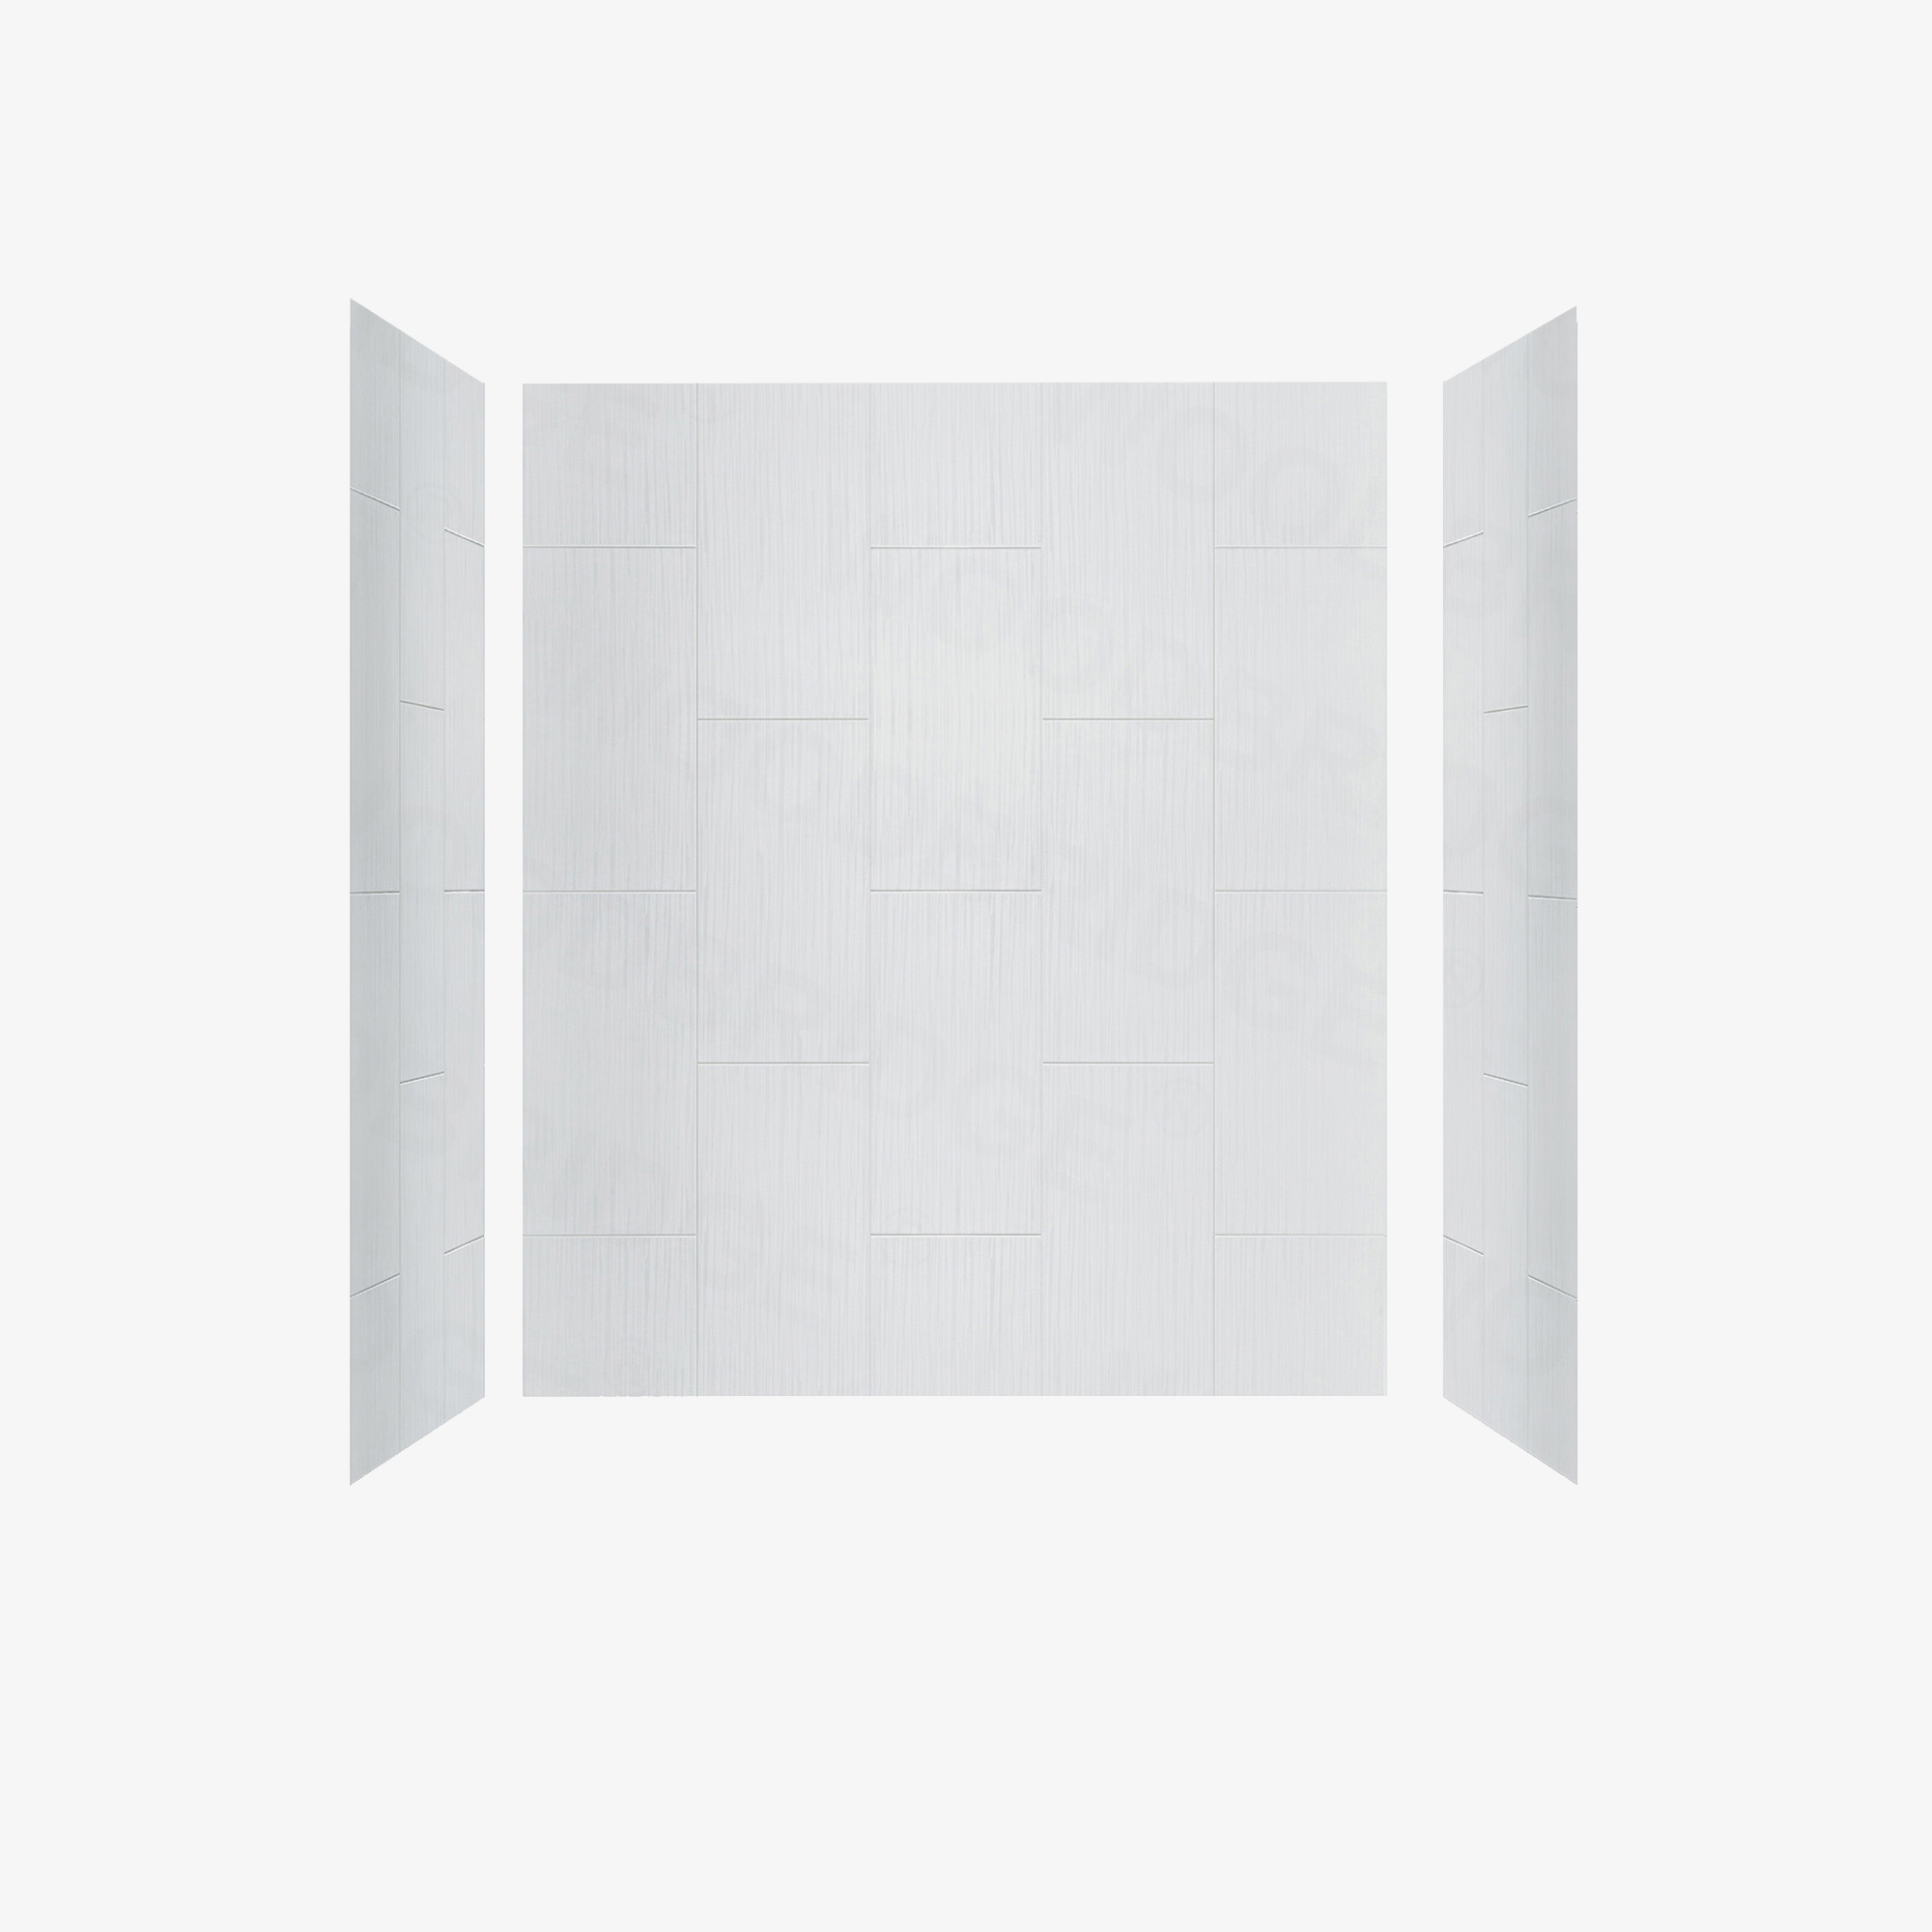  WOODBRIDGE  Solid Surface 3-Panel Shower Wall Kit, 32-in L x 60-in W x 75-in H, Stacked block in a staggered vertical pattern.  Matte Finish, White_11714